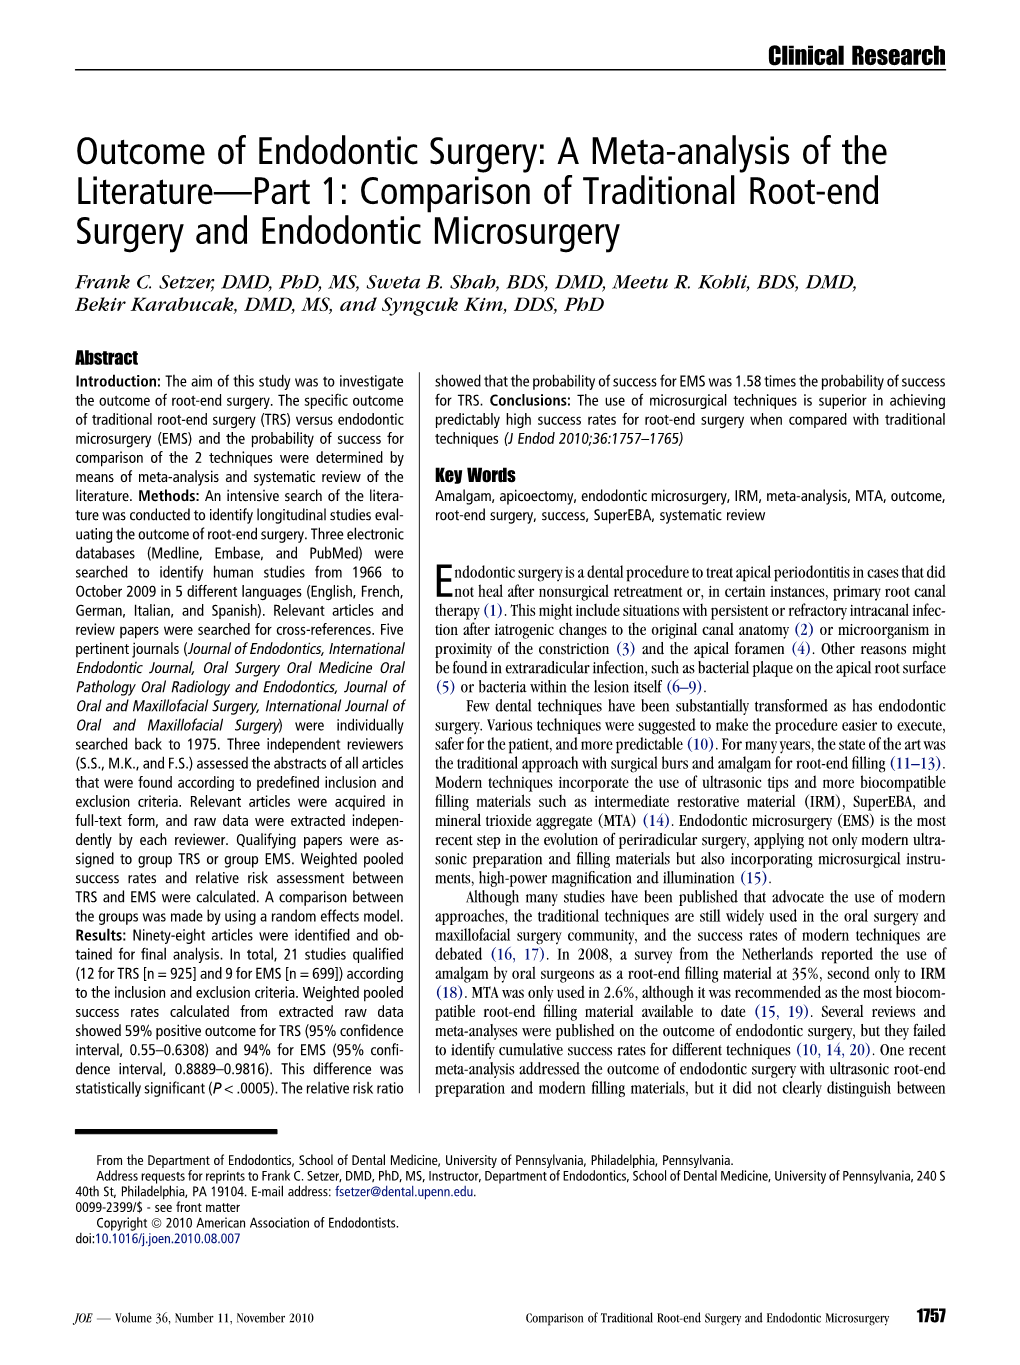 Outcome of Endodontic Surgery: a Meta-Analysis of the Literature-Part 1